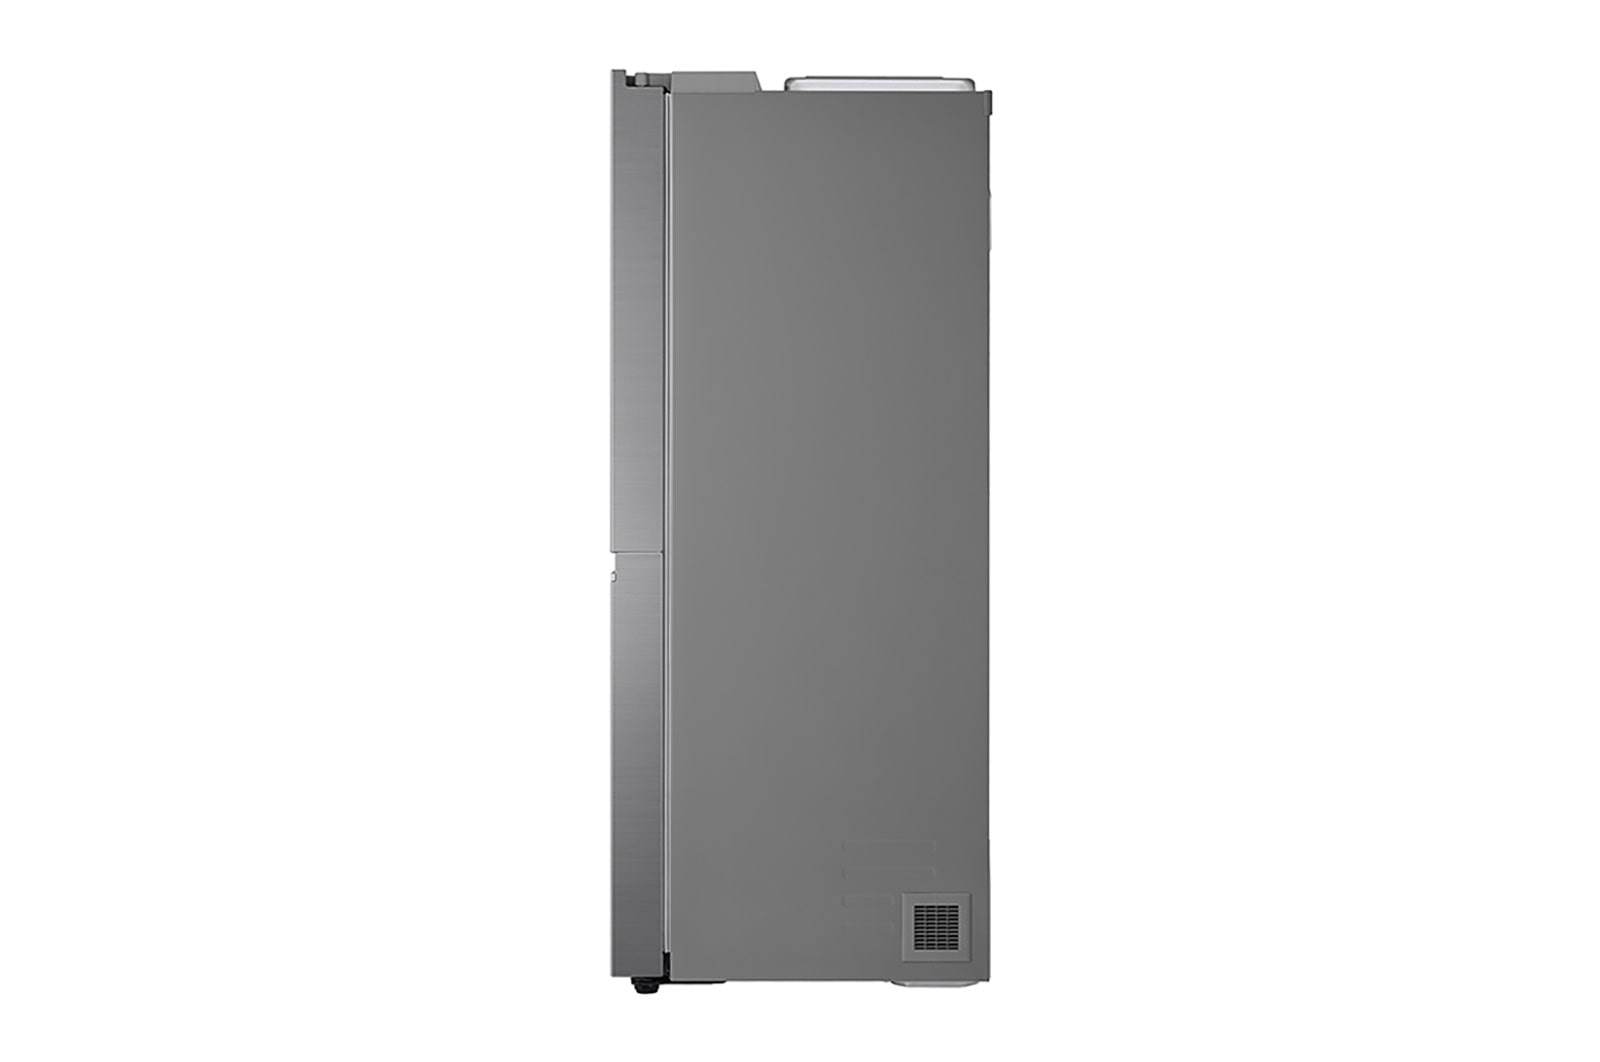 694L Side-by-Side Large Capacity Fridge in Silver | LG NP